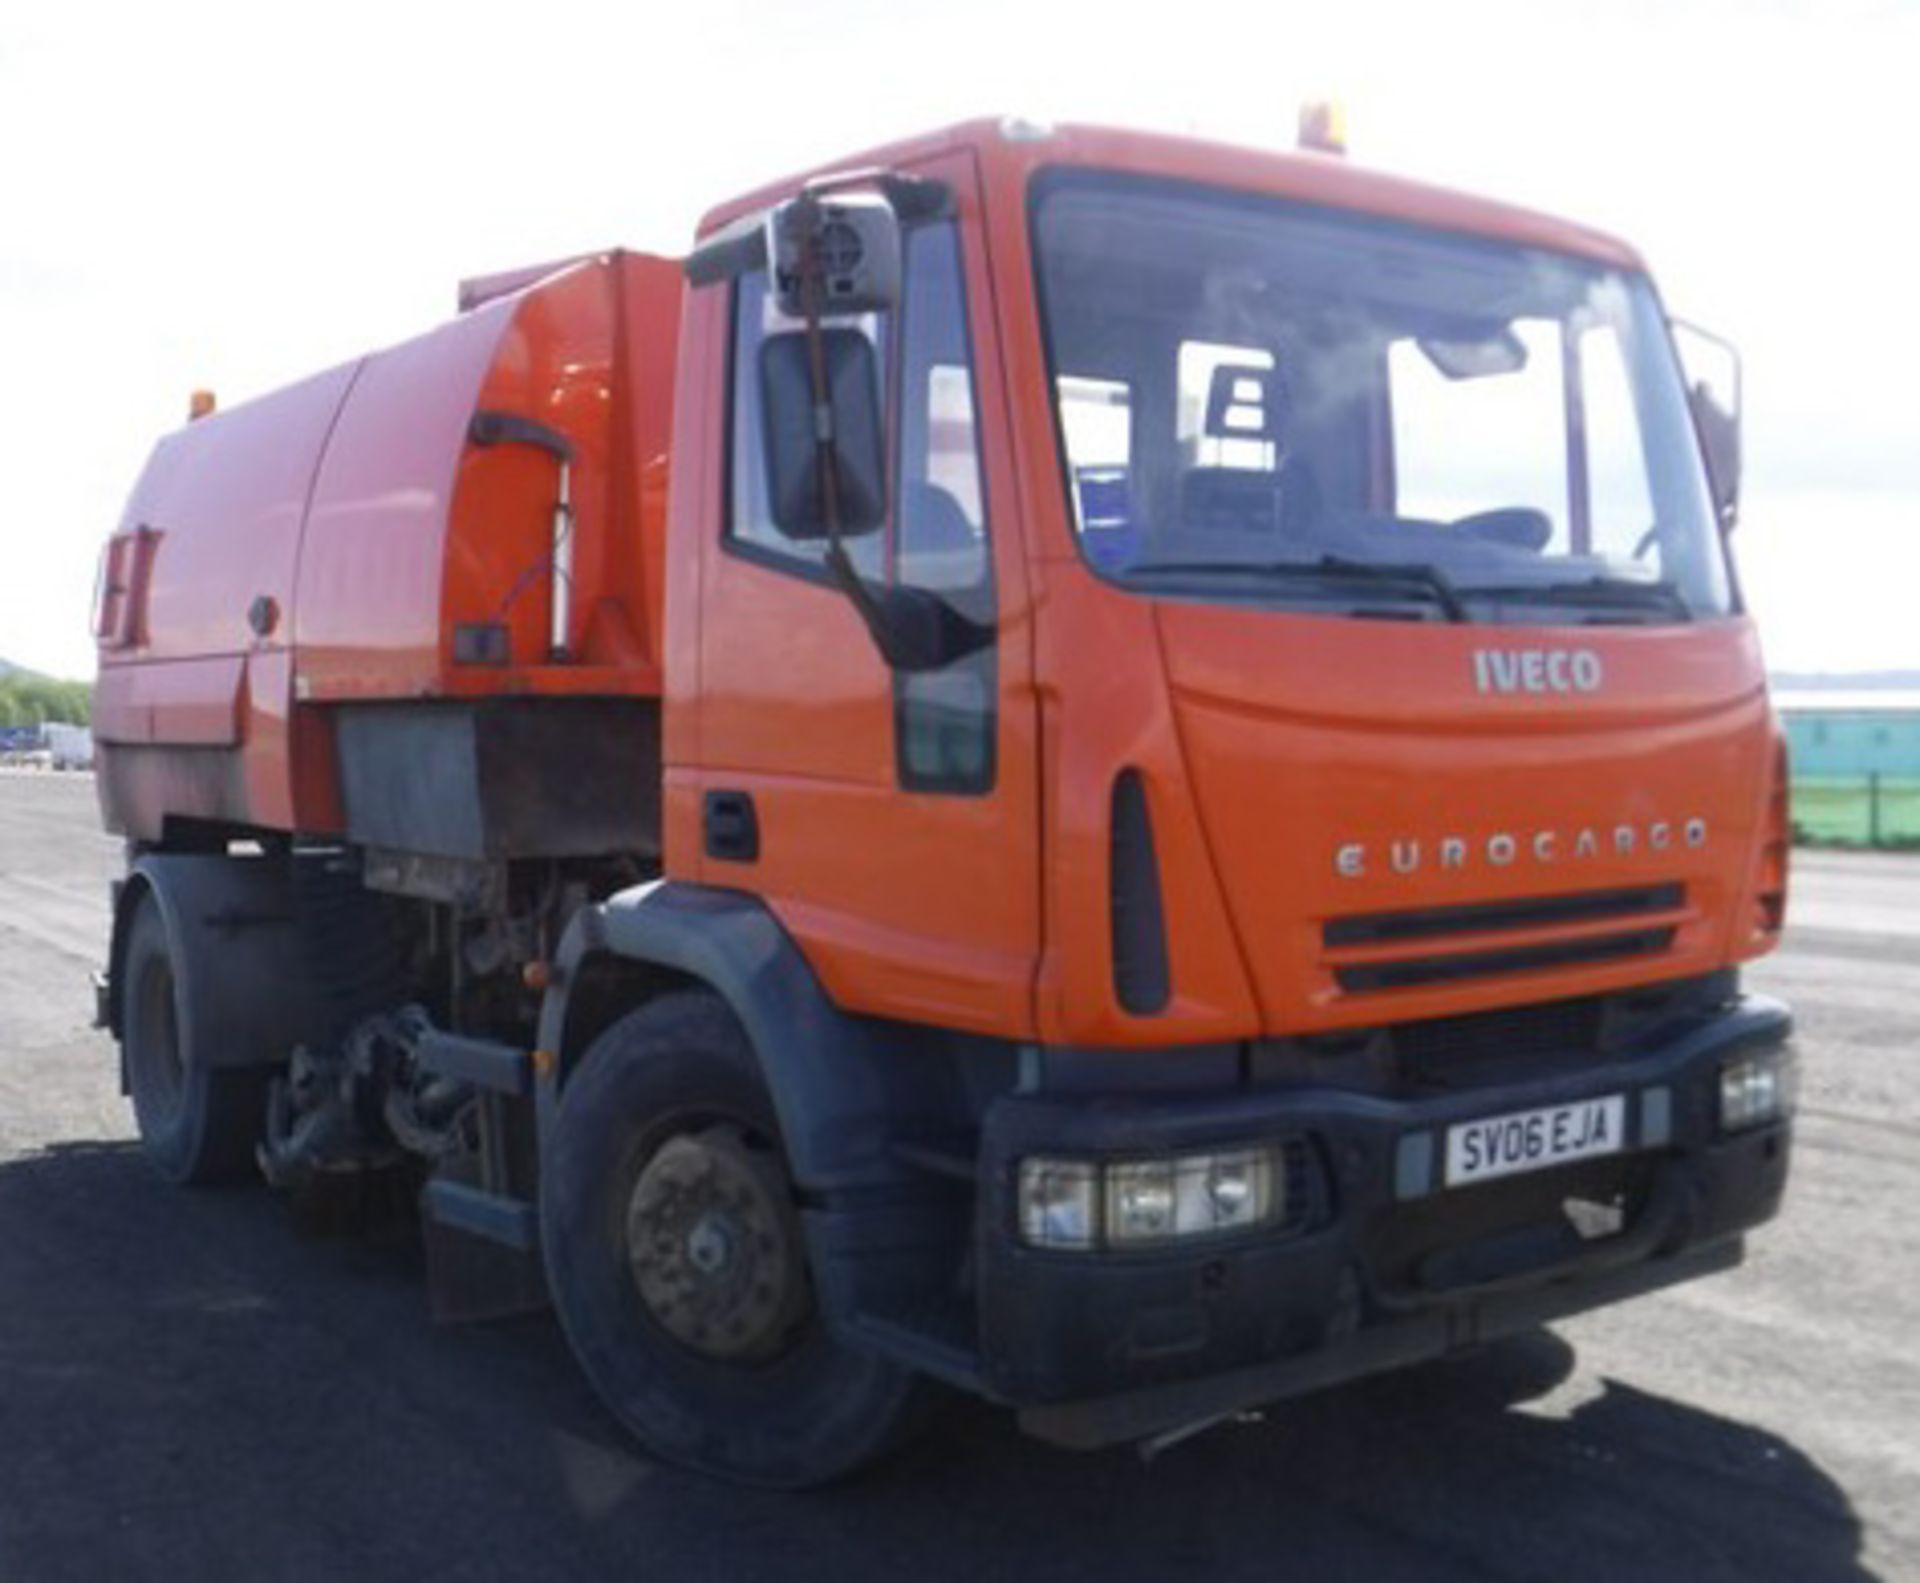 IVECO Johnson Sweeper - 5880cc - Image 15 of 21